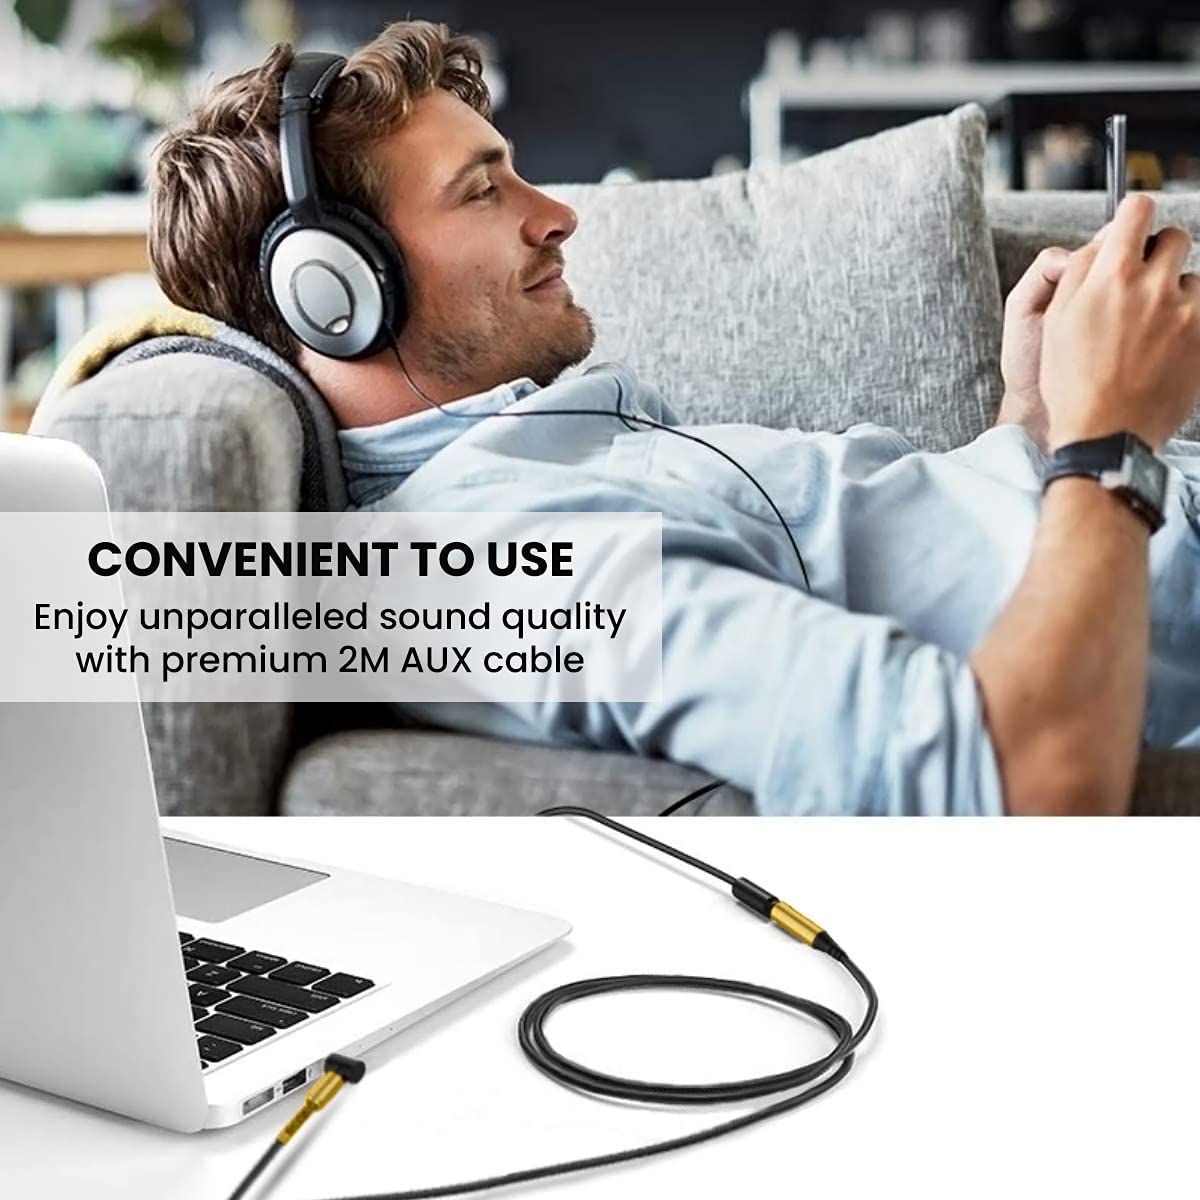 car aux cable car auxiliary cable computer speaker cable connector rj45 headphone adapter headphone adapter apple headphone adapter for iphone headphone adapter iphone headphone adapter usb c headphone adaptor headphone adaptor jack